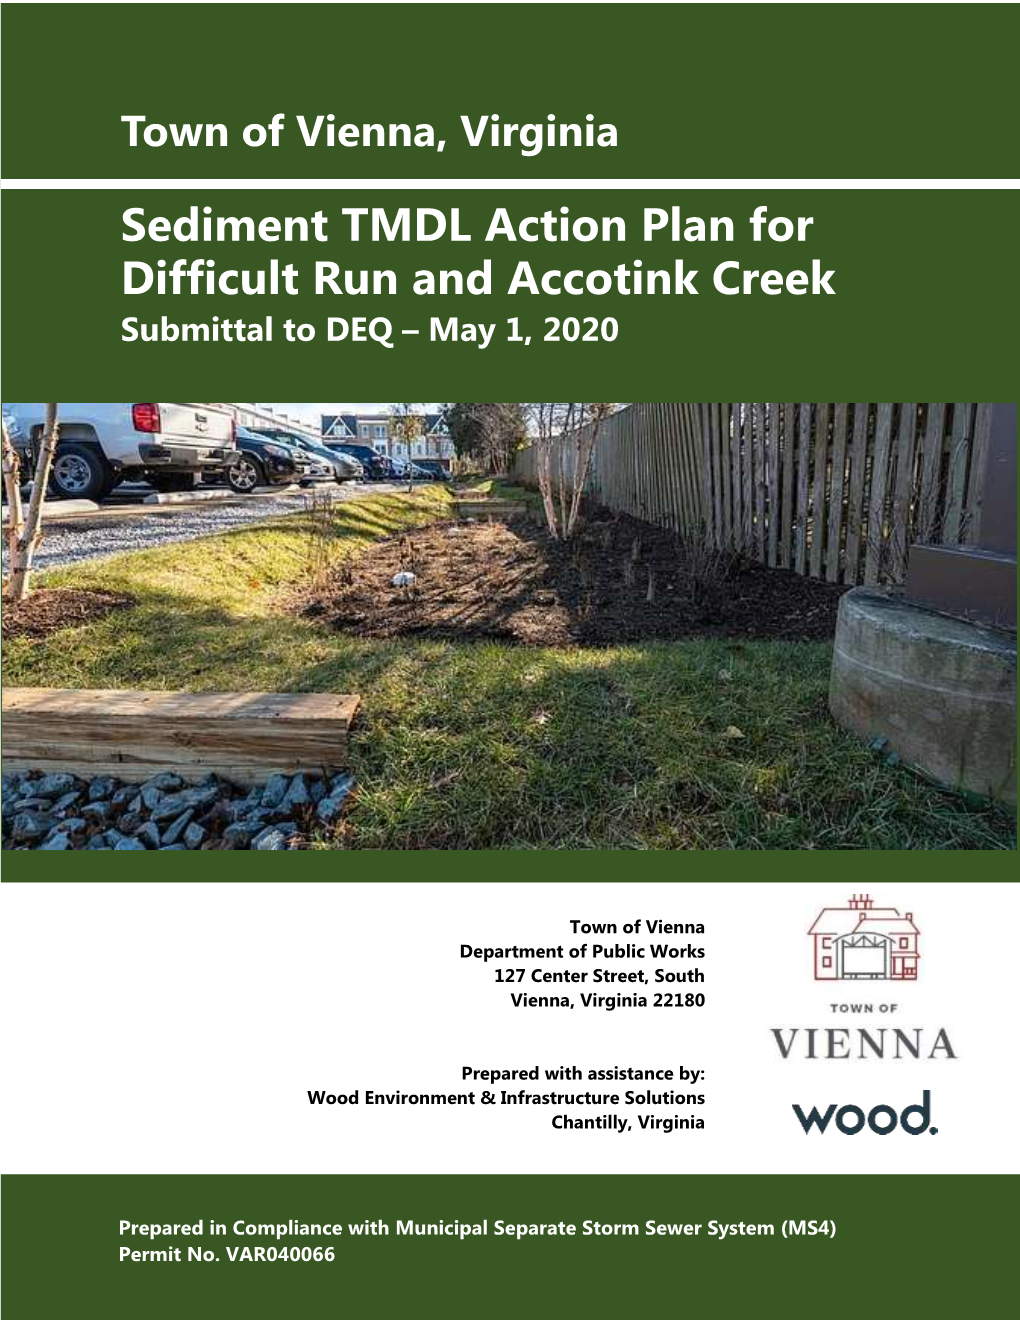 Sediment TMDL Action Plan for Difficult Run and Accotink Creek Submittal to DEQ – May 1, 2020